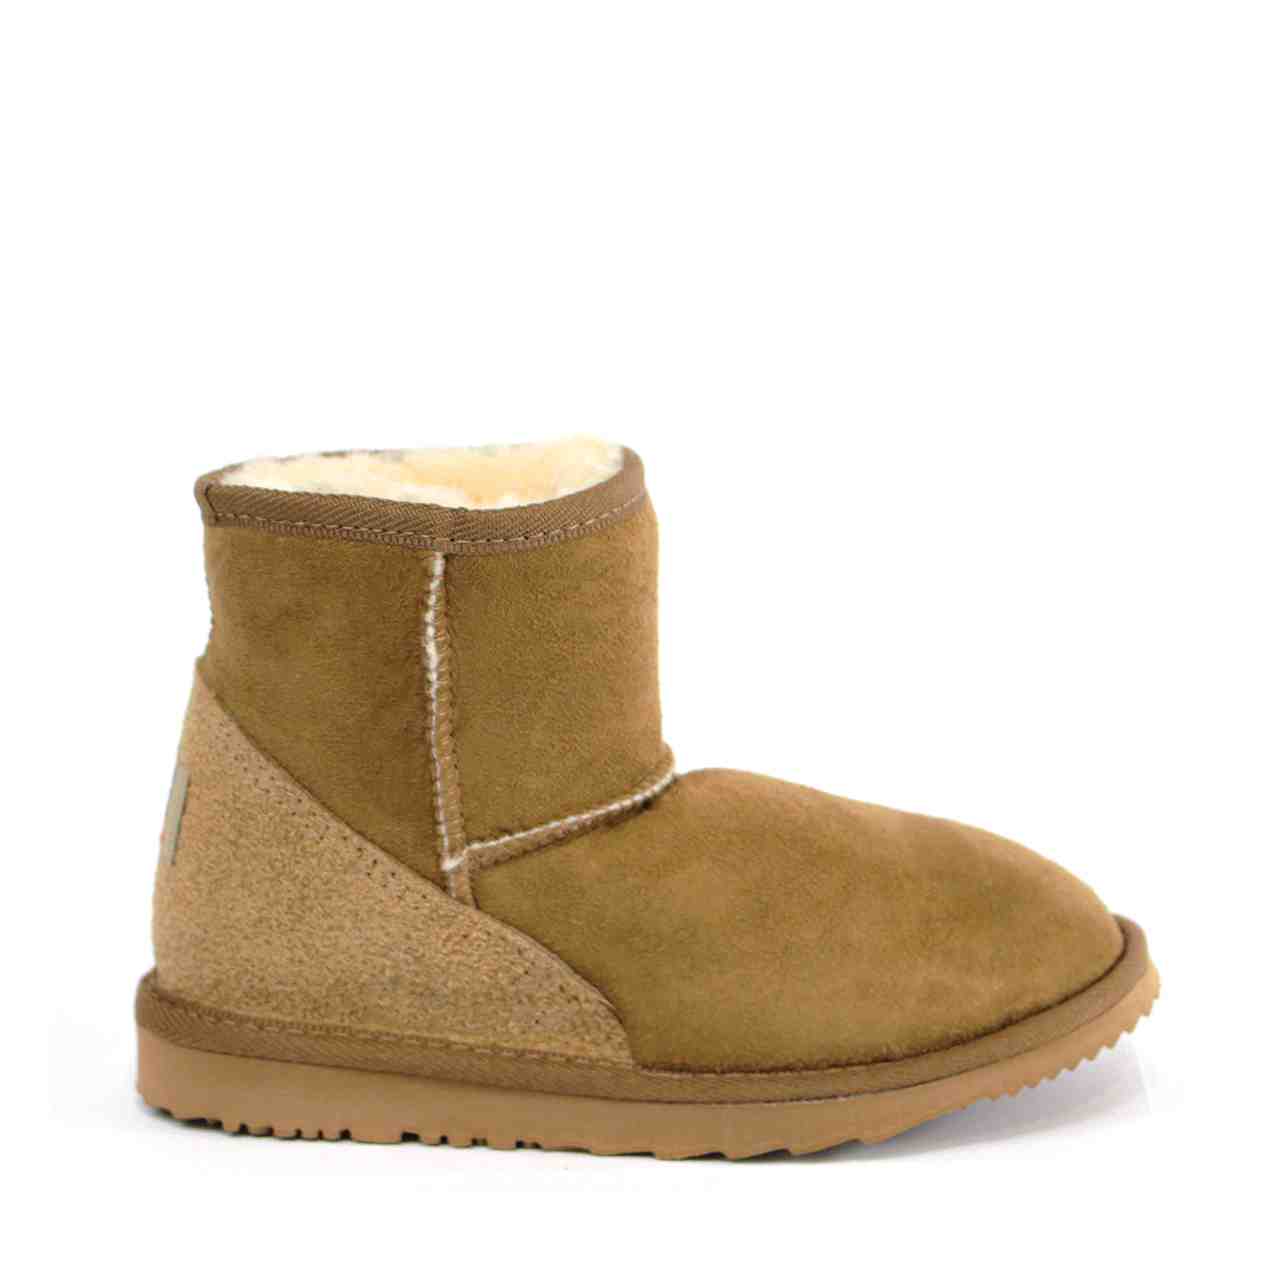 Mini Boots Made by Ugg Australia